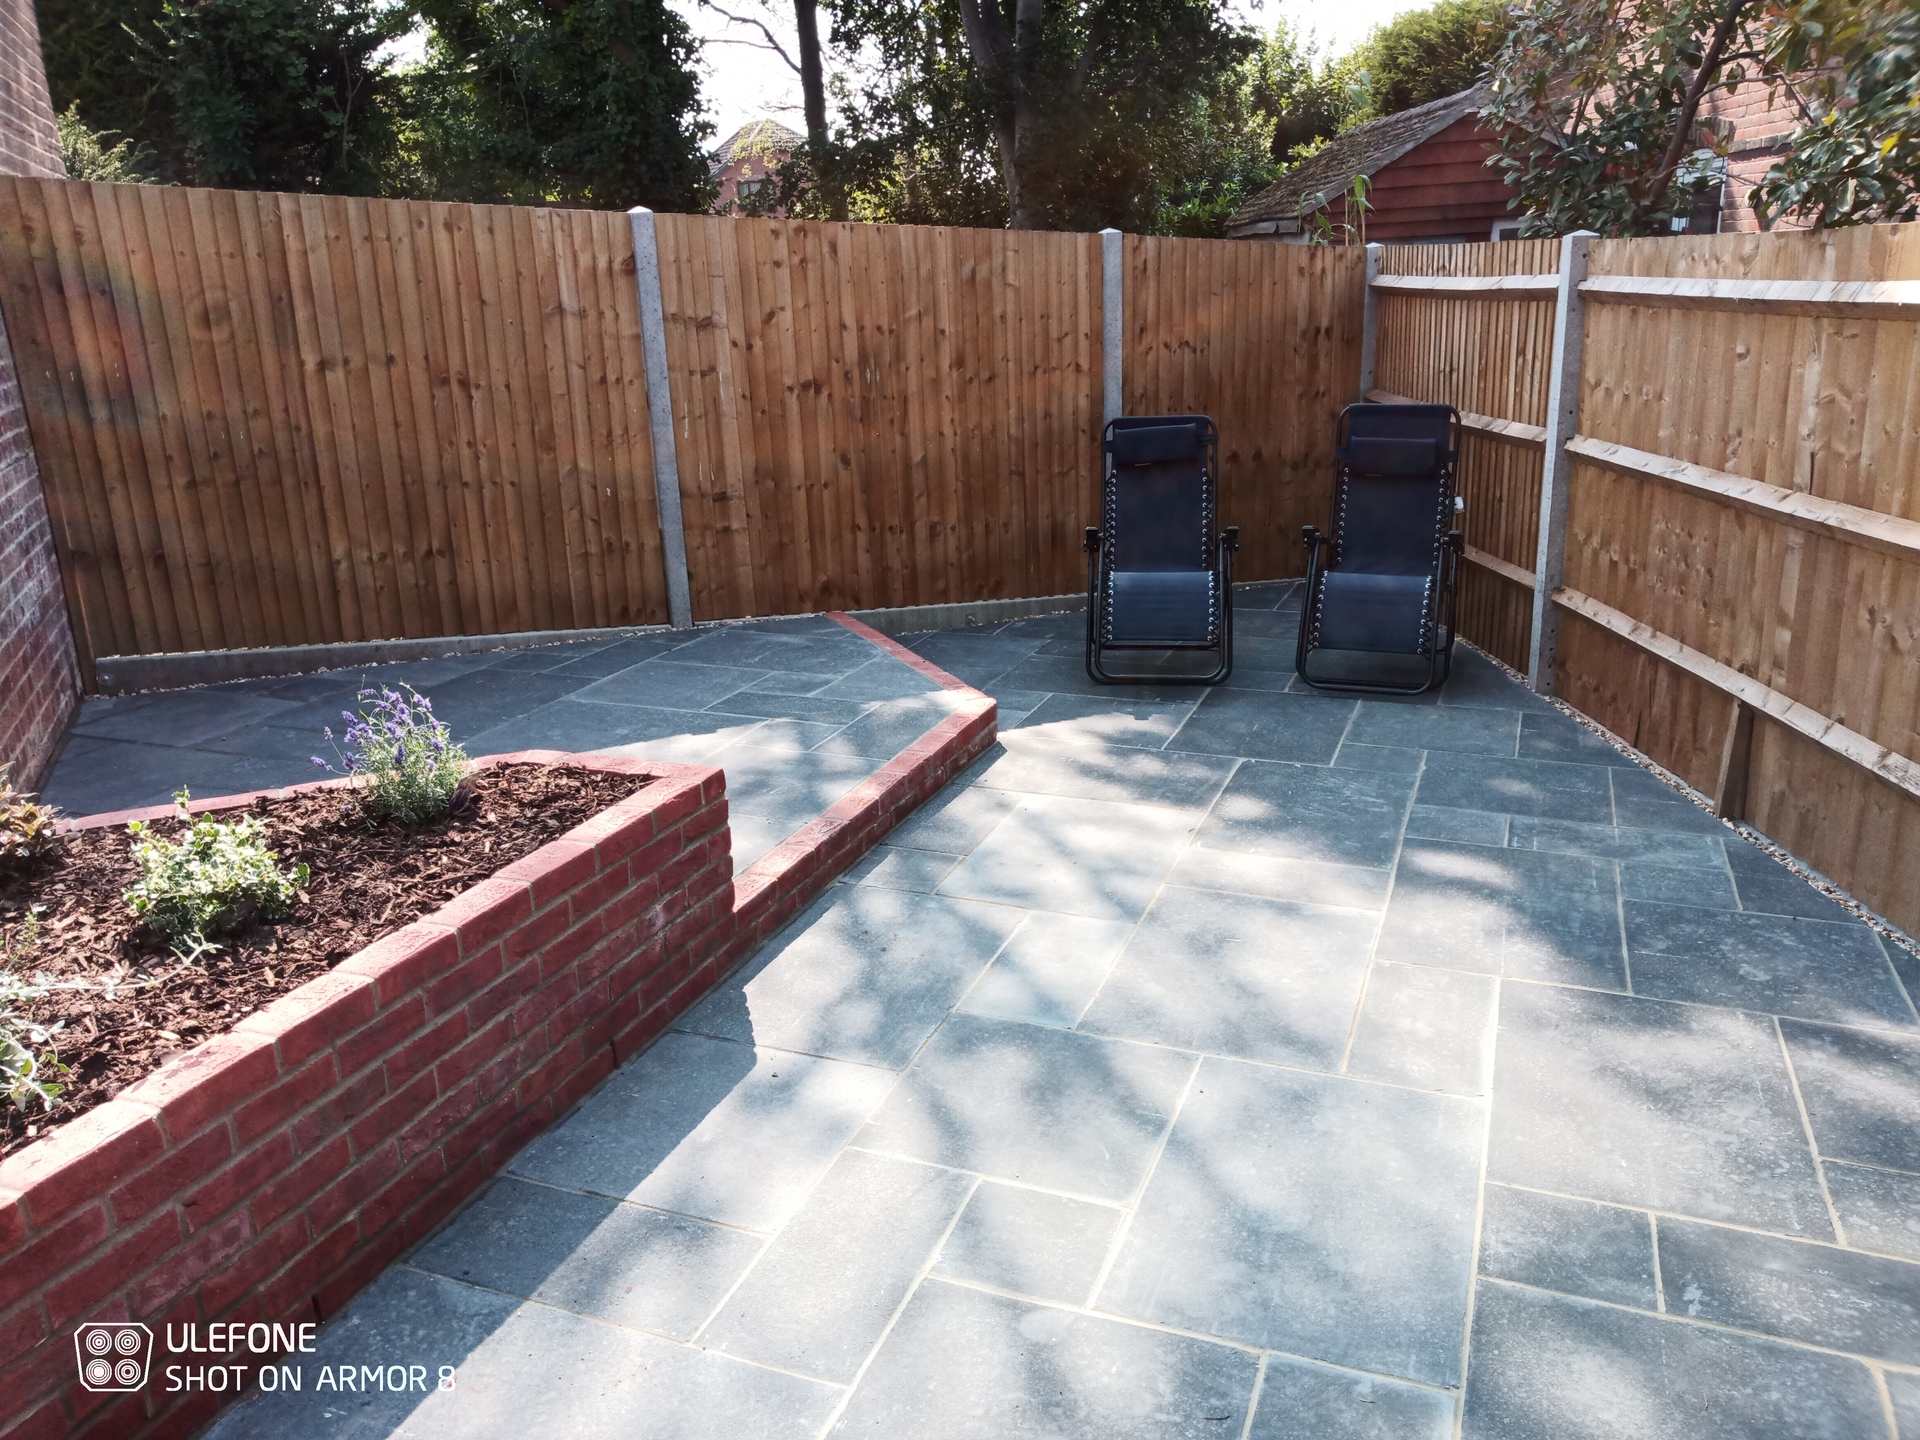 A garden makeover with new limestone paving, fencing. bricks walls, raised planters, steps, planting and hot tub area